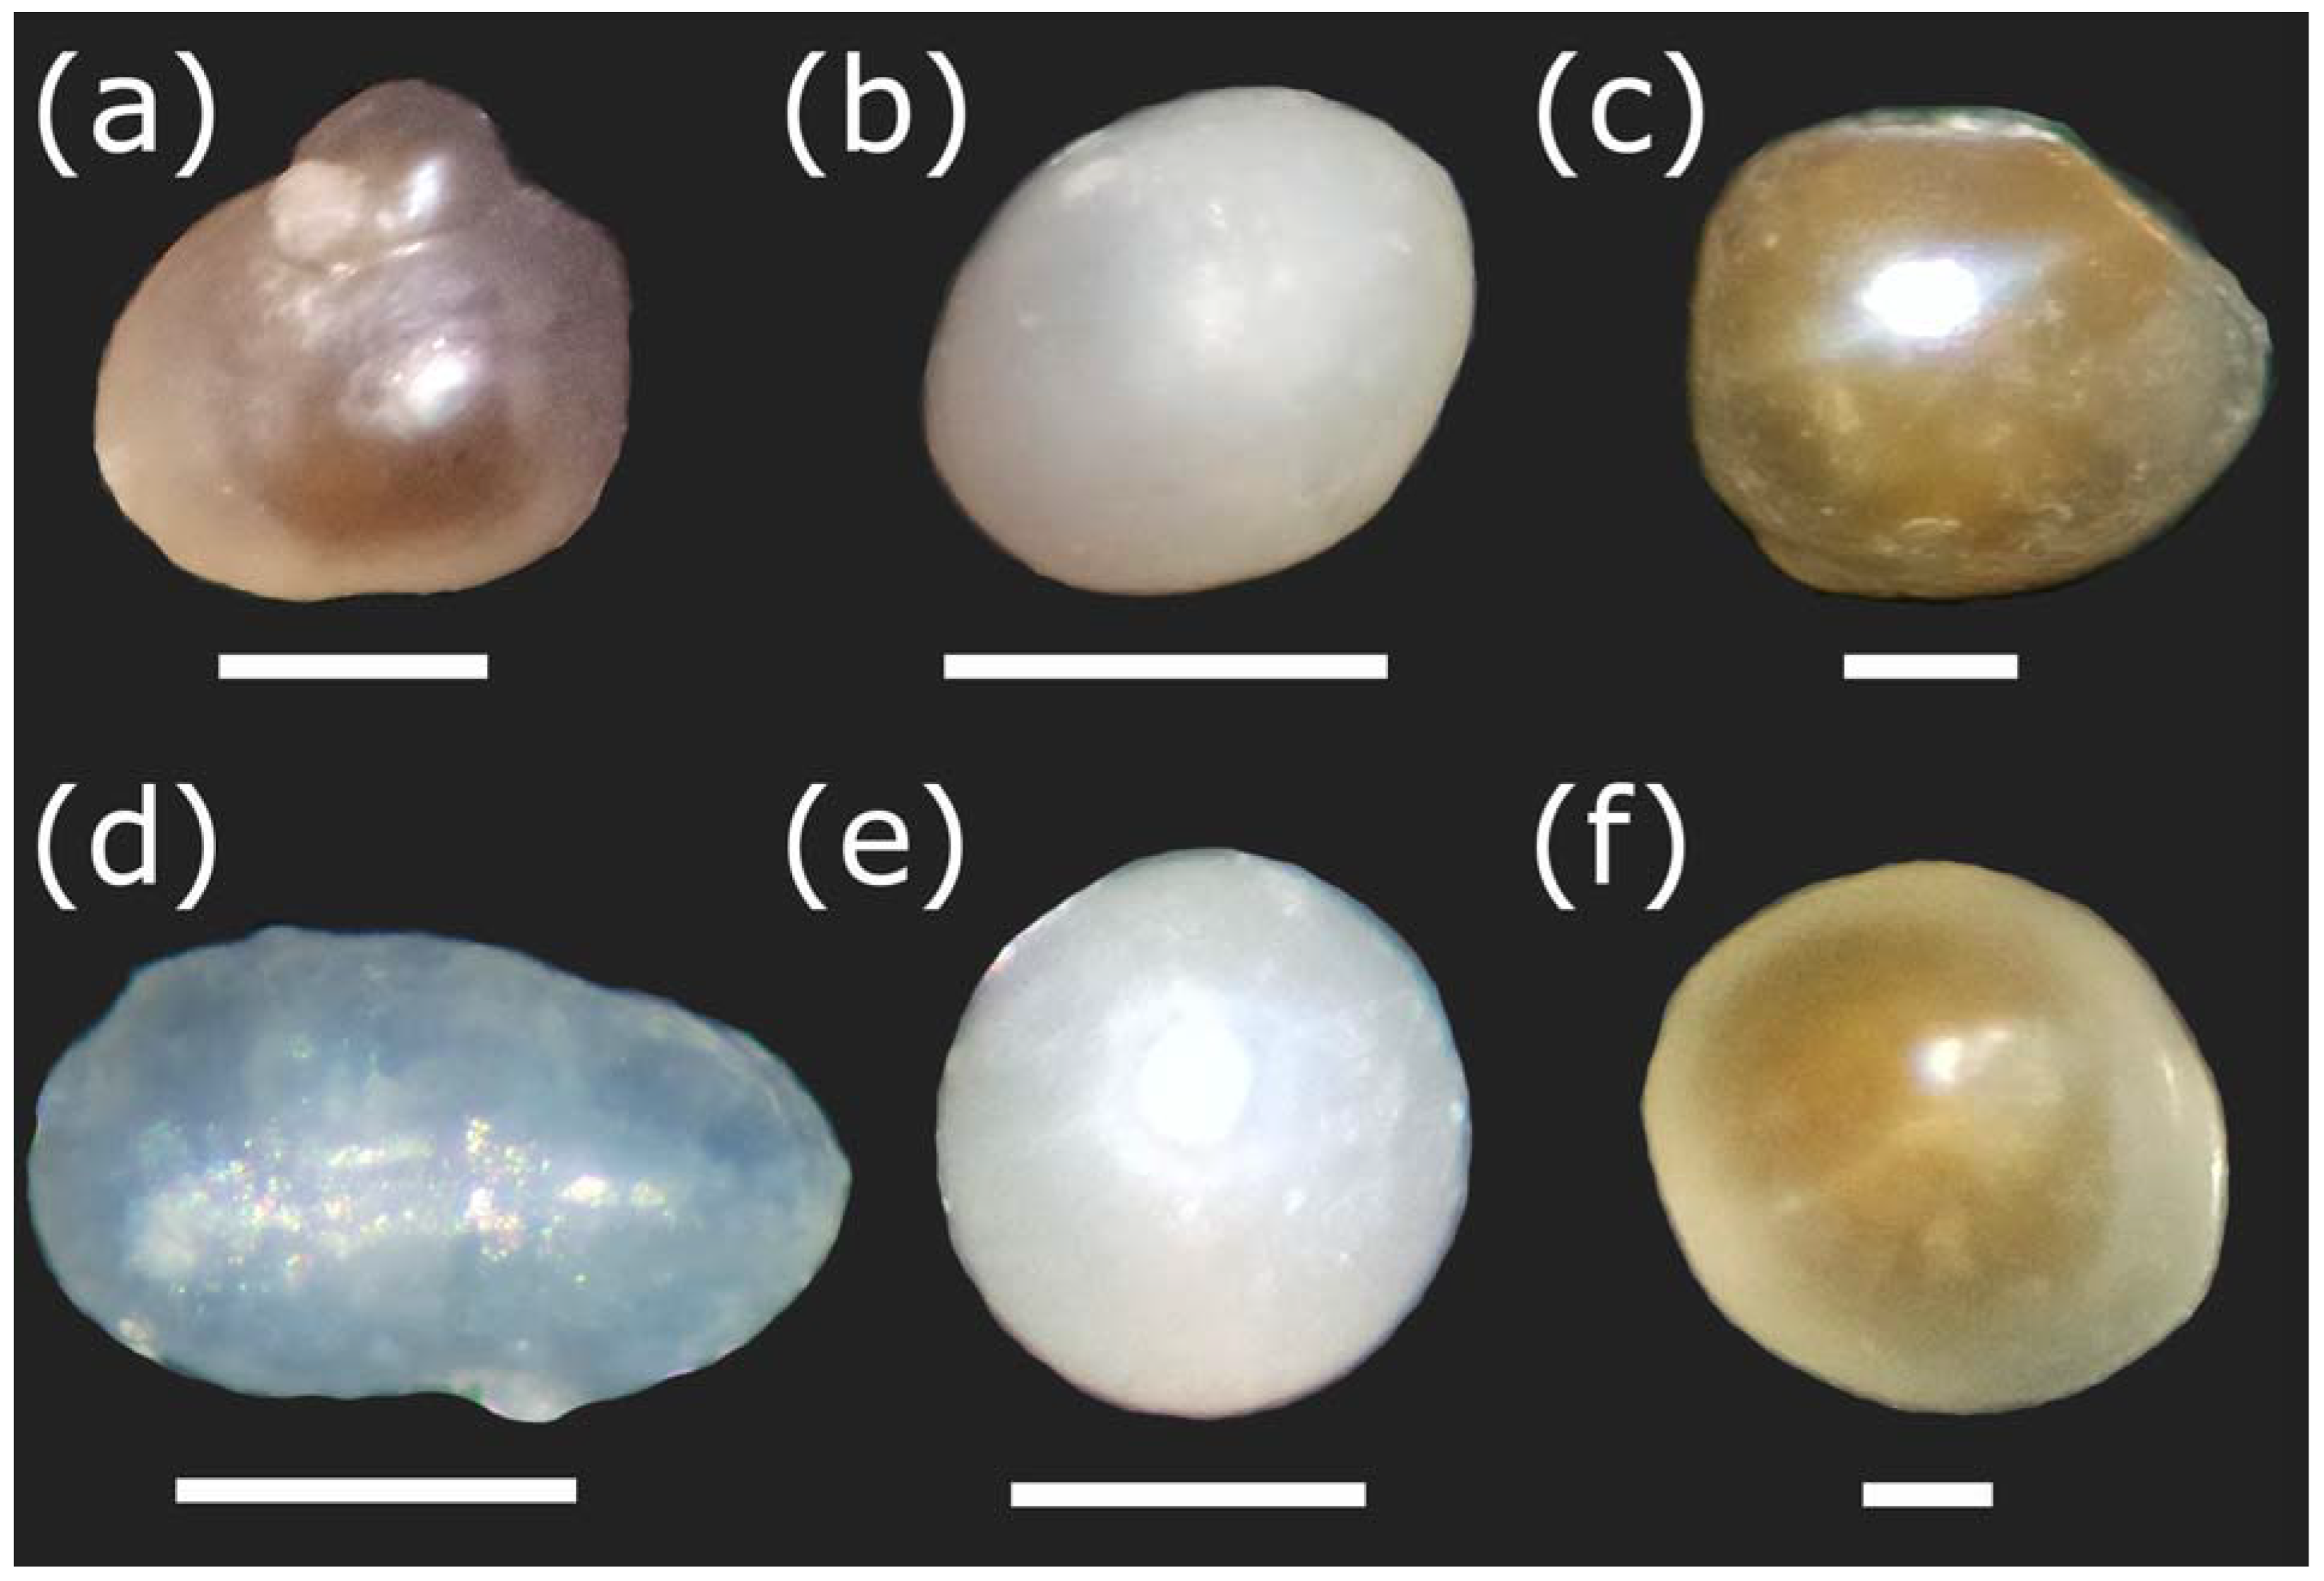 Proteins that make pearls shimmer are found